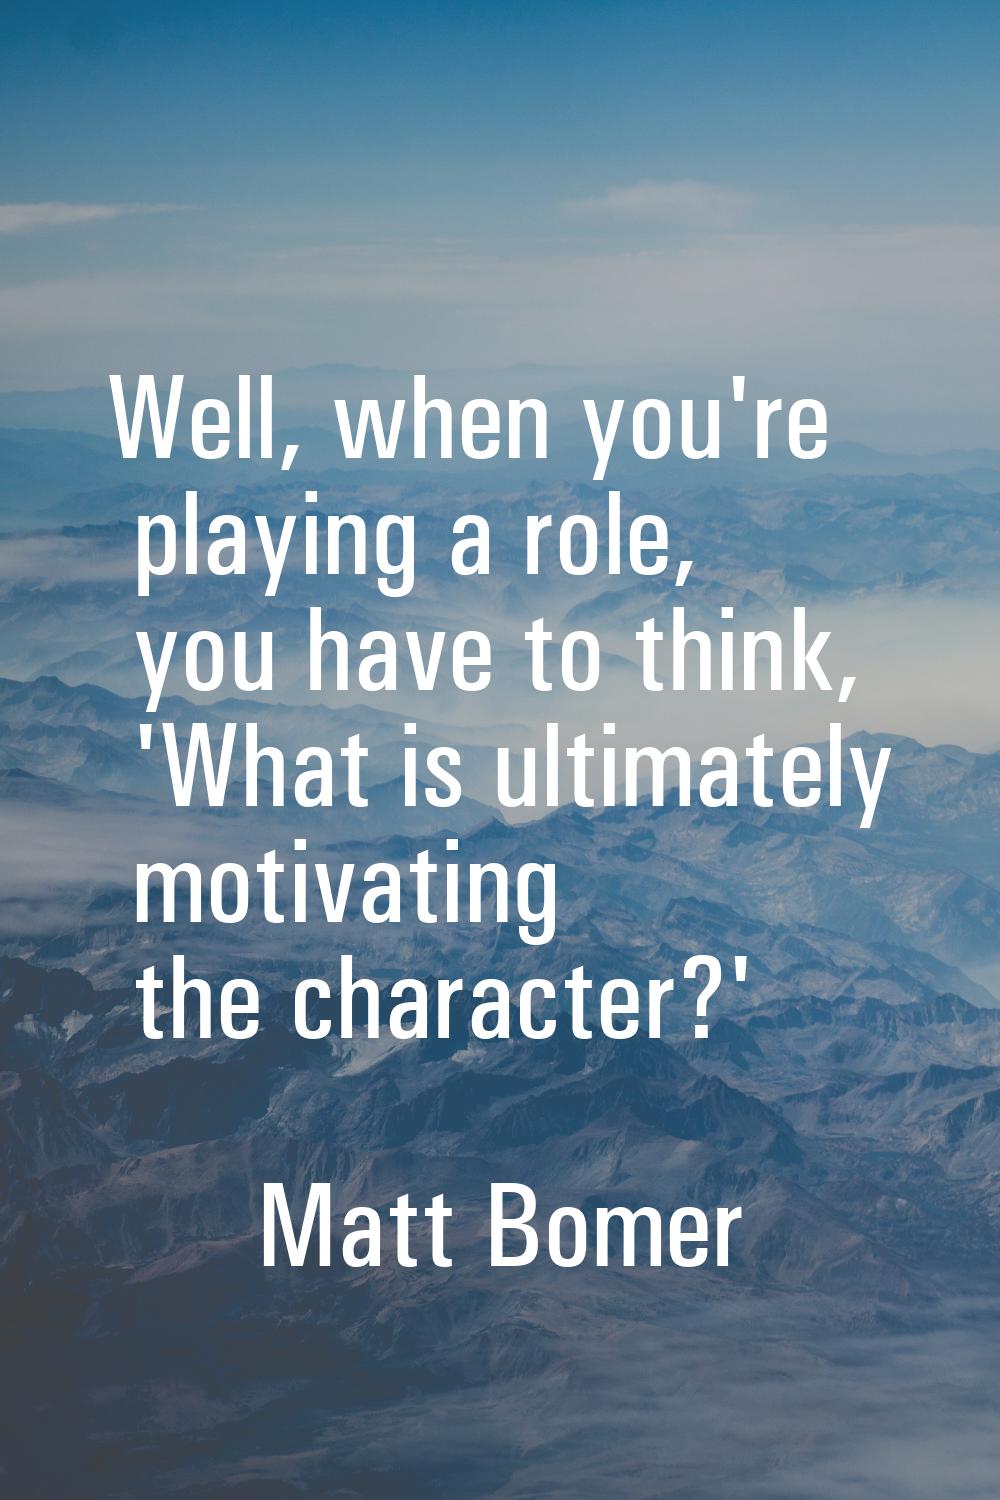 Well, when you're playing a role, you have to think, 'What is ultimately motivating the character?'